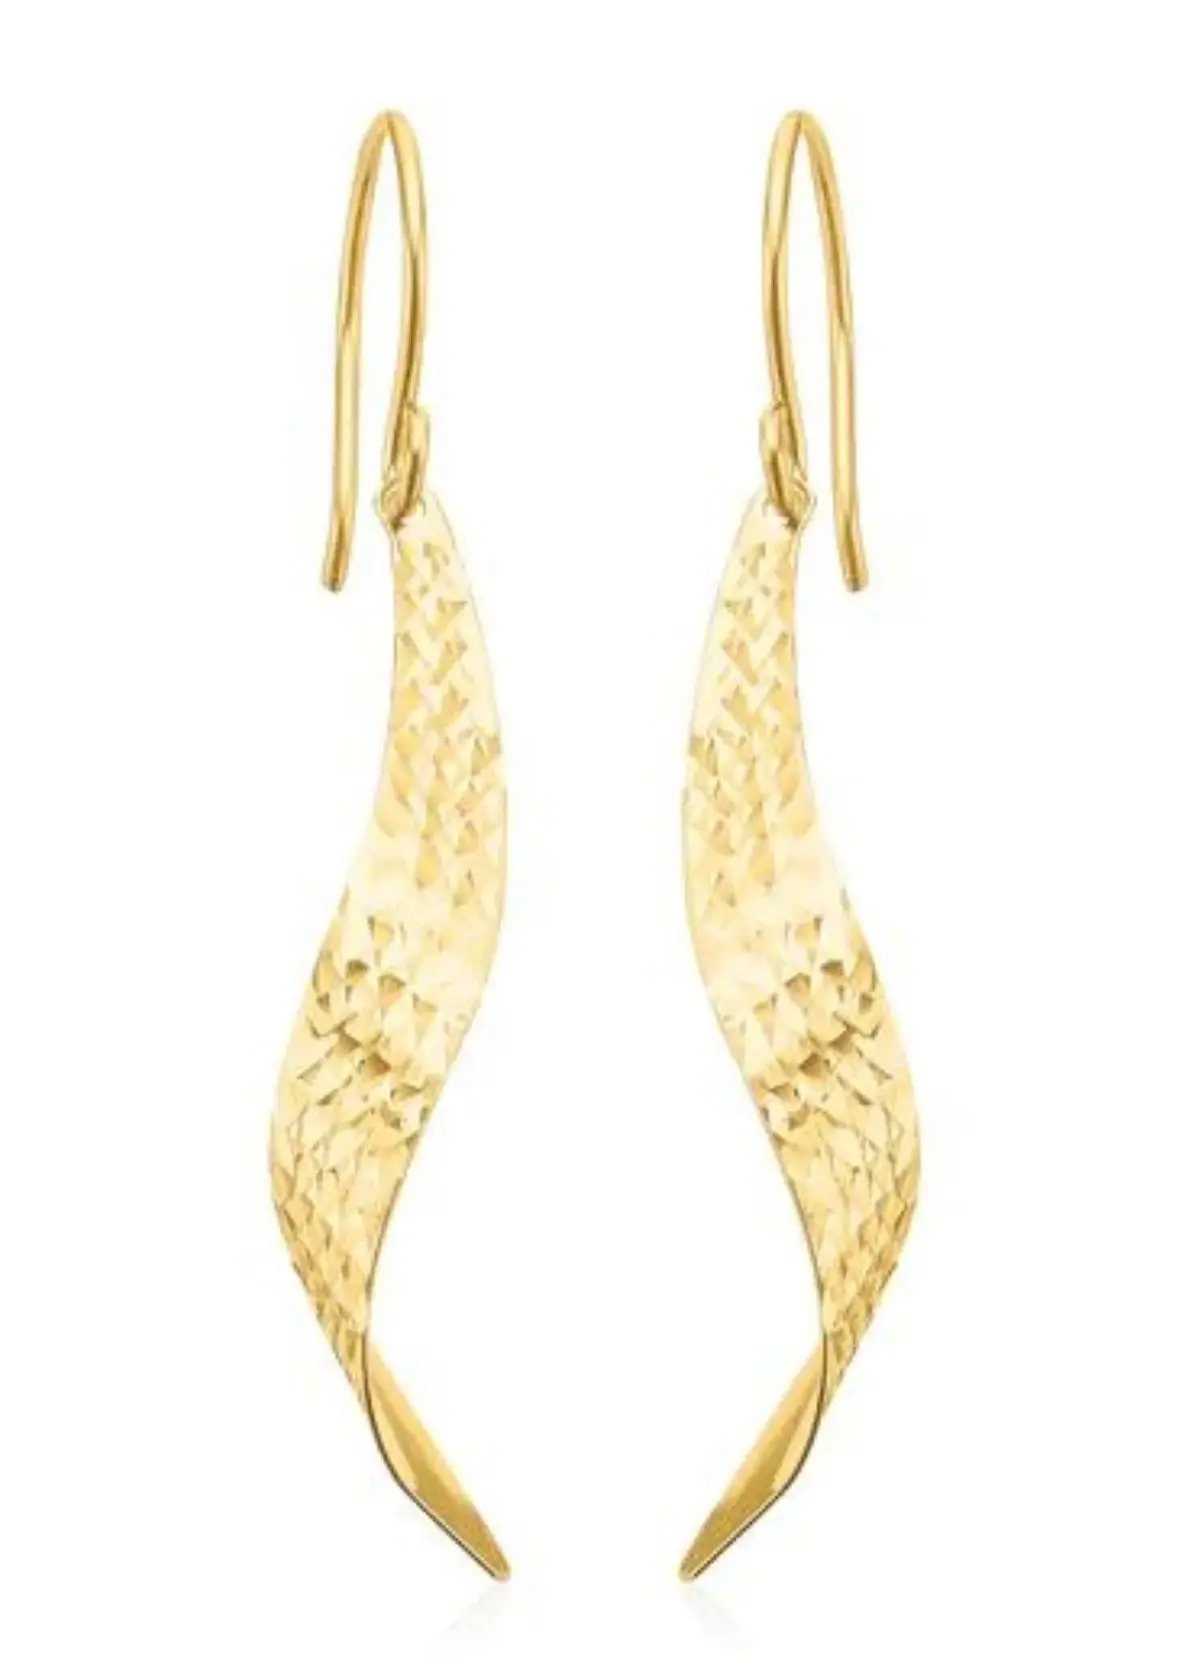 How to Choose the Right Twist Earrings?